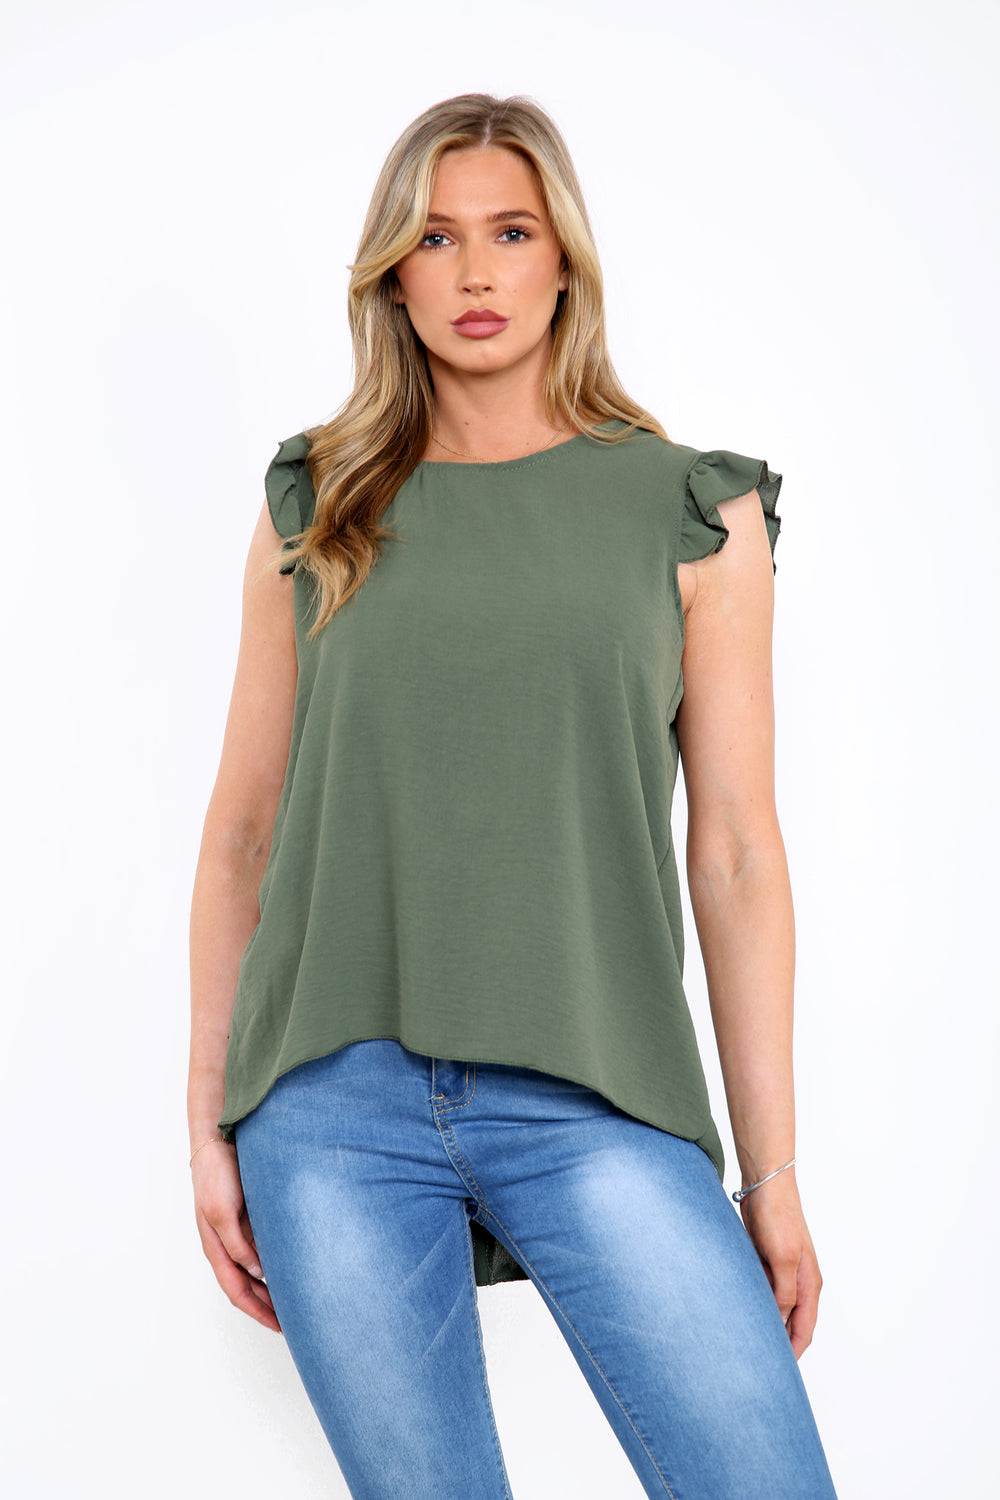 BUTTON BACK DETAILED TOP (7980499435768)